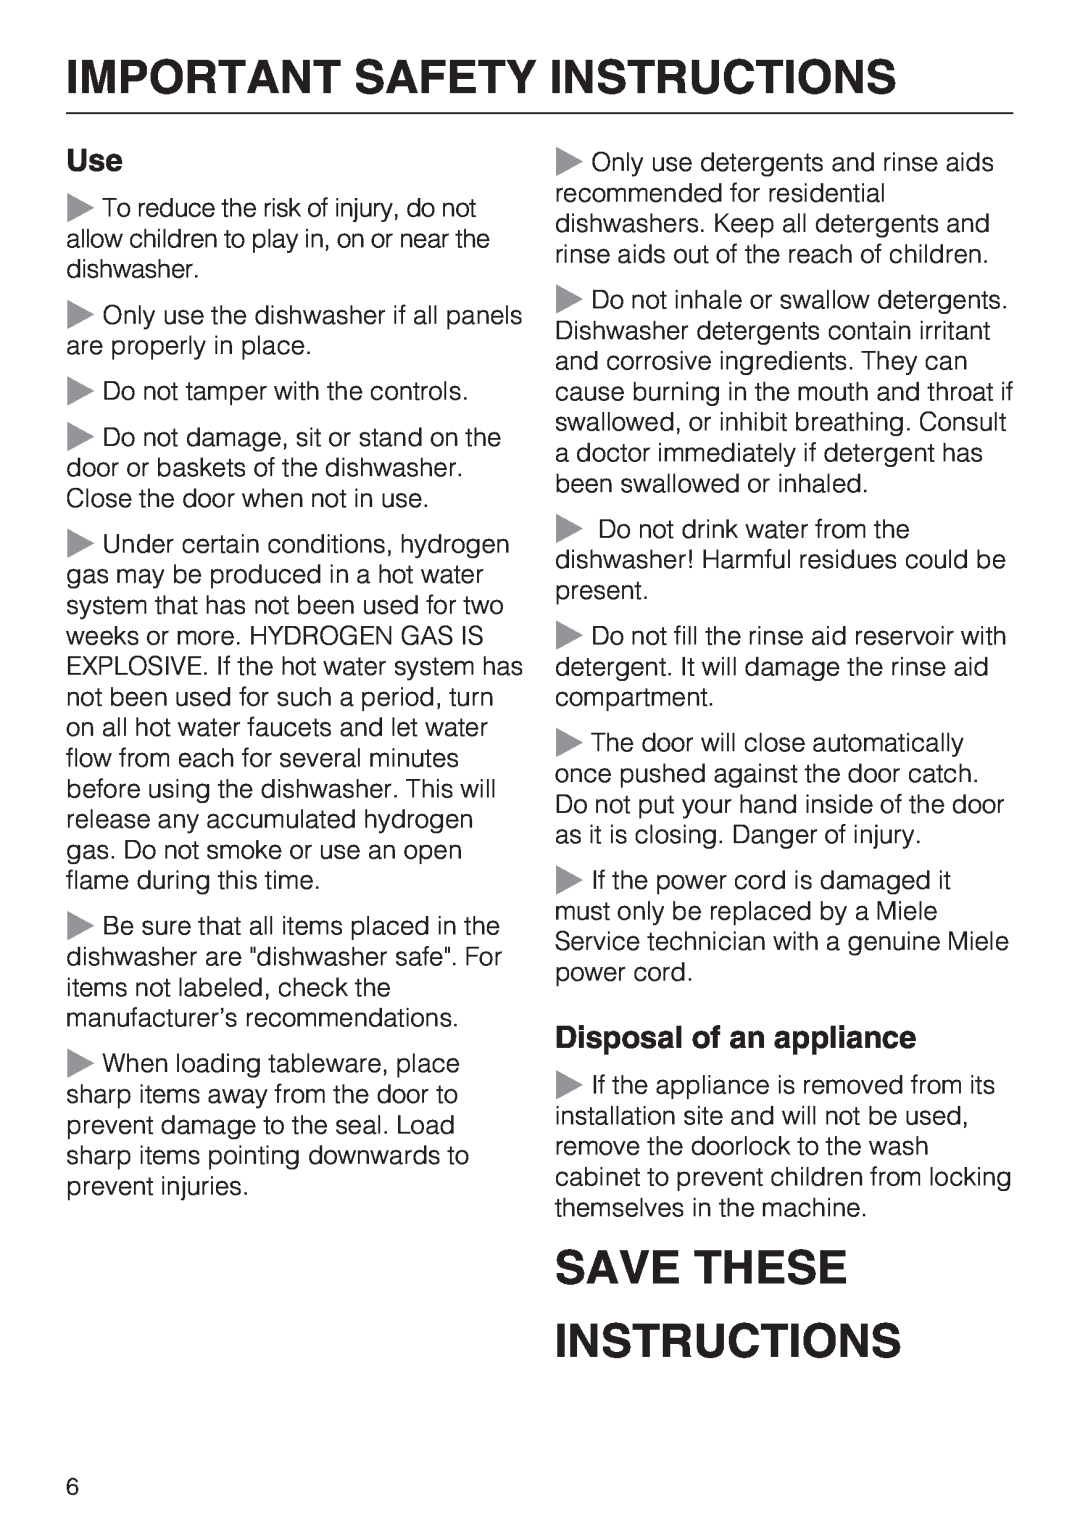 Miele G 1262 manual Save These Instructions, Disposal of an appliance, Important Safety Instructions 